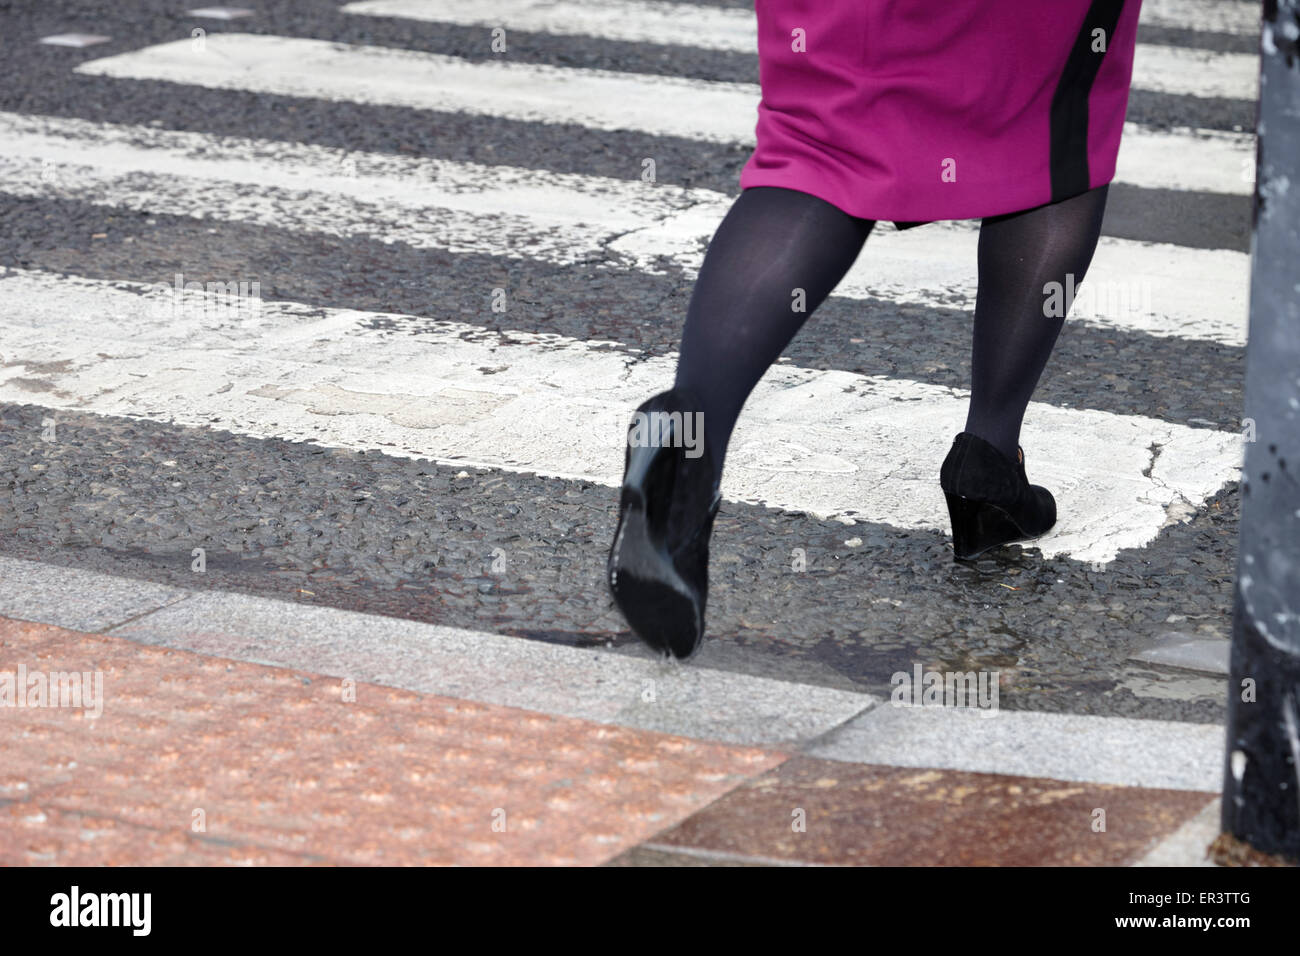 business woman walking over textured pedestrian crossing pavement in ...